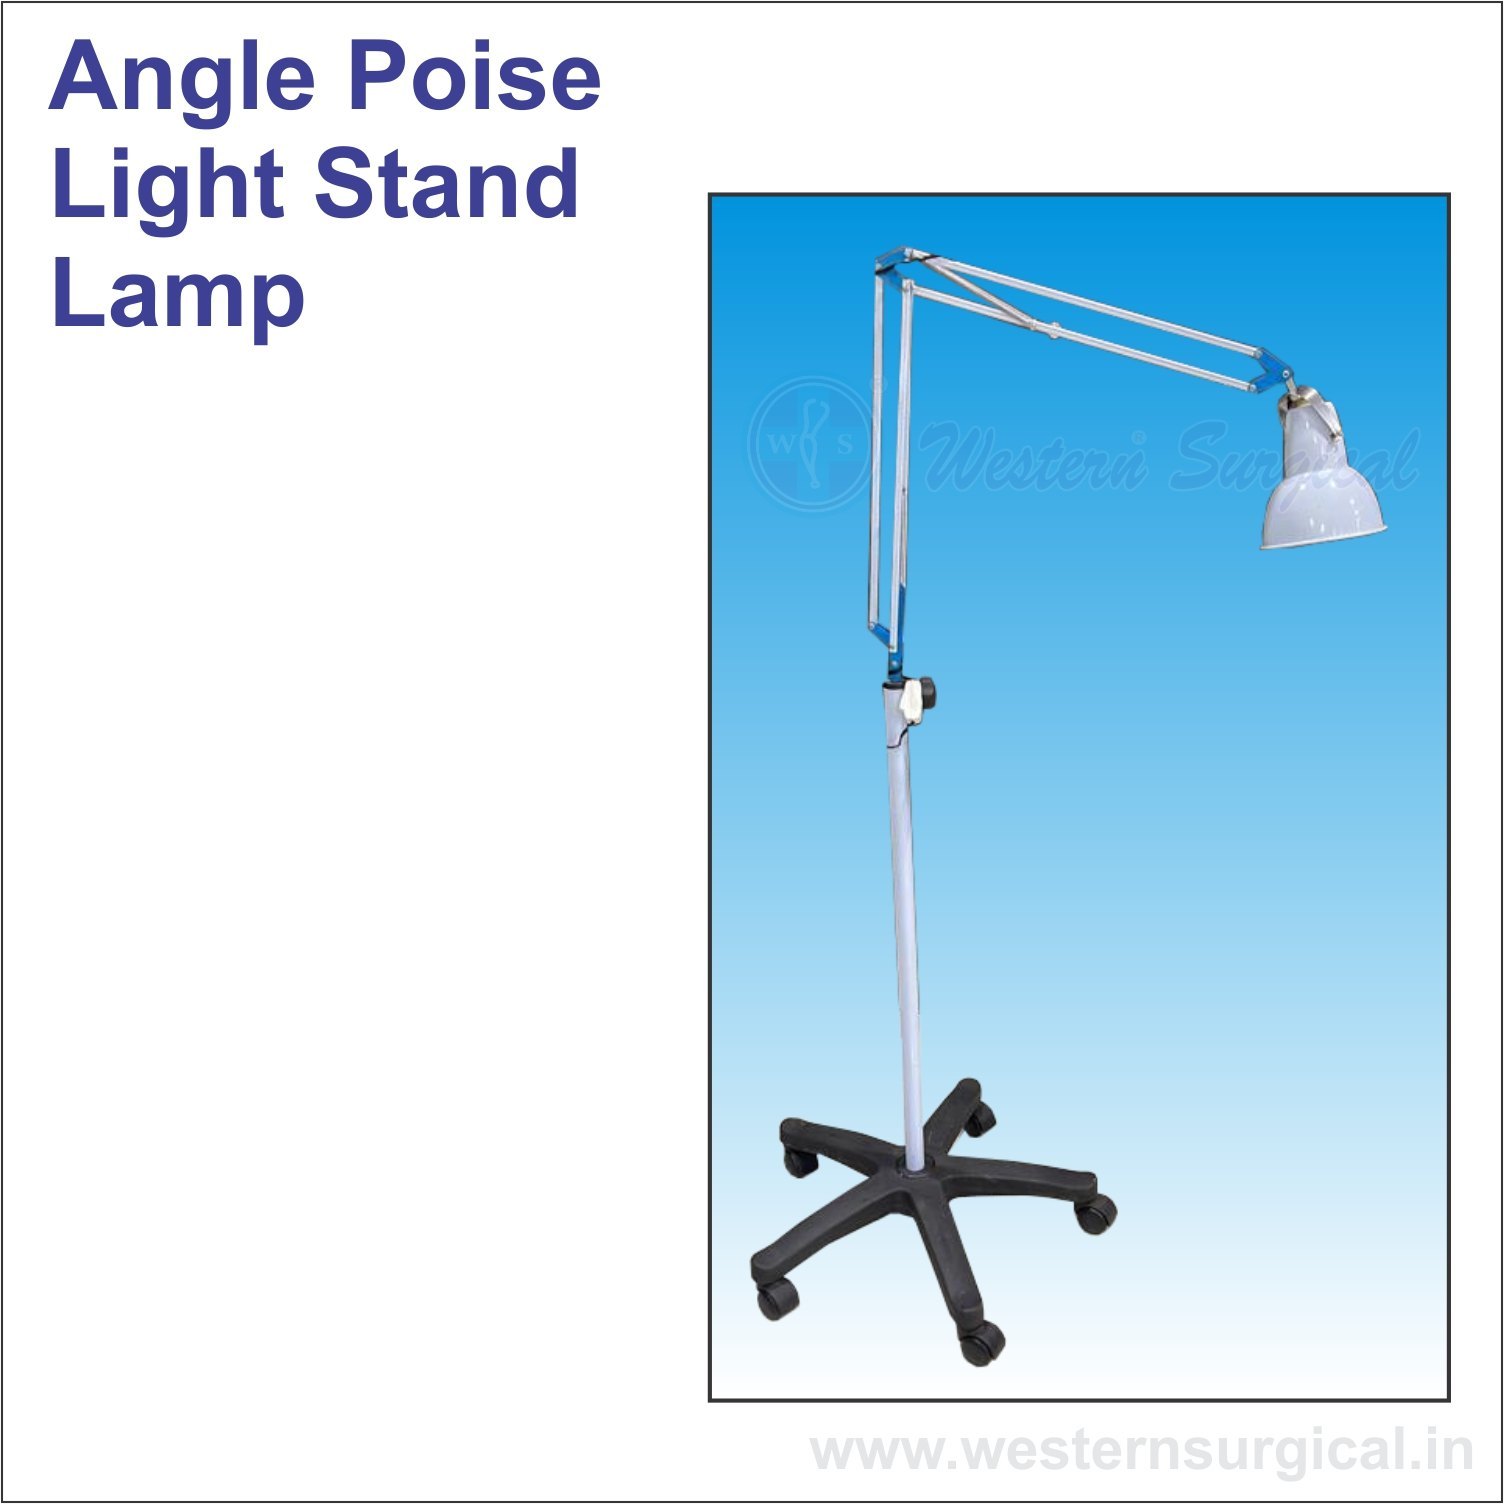 Angle Poise Light Stand Lamp